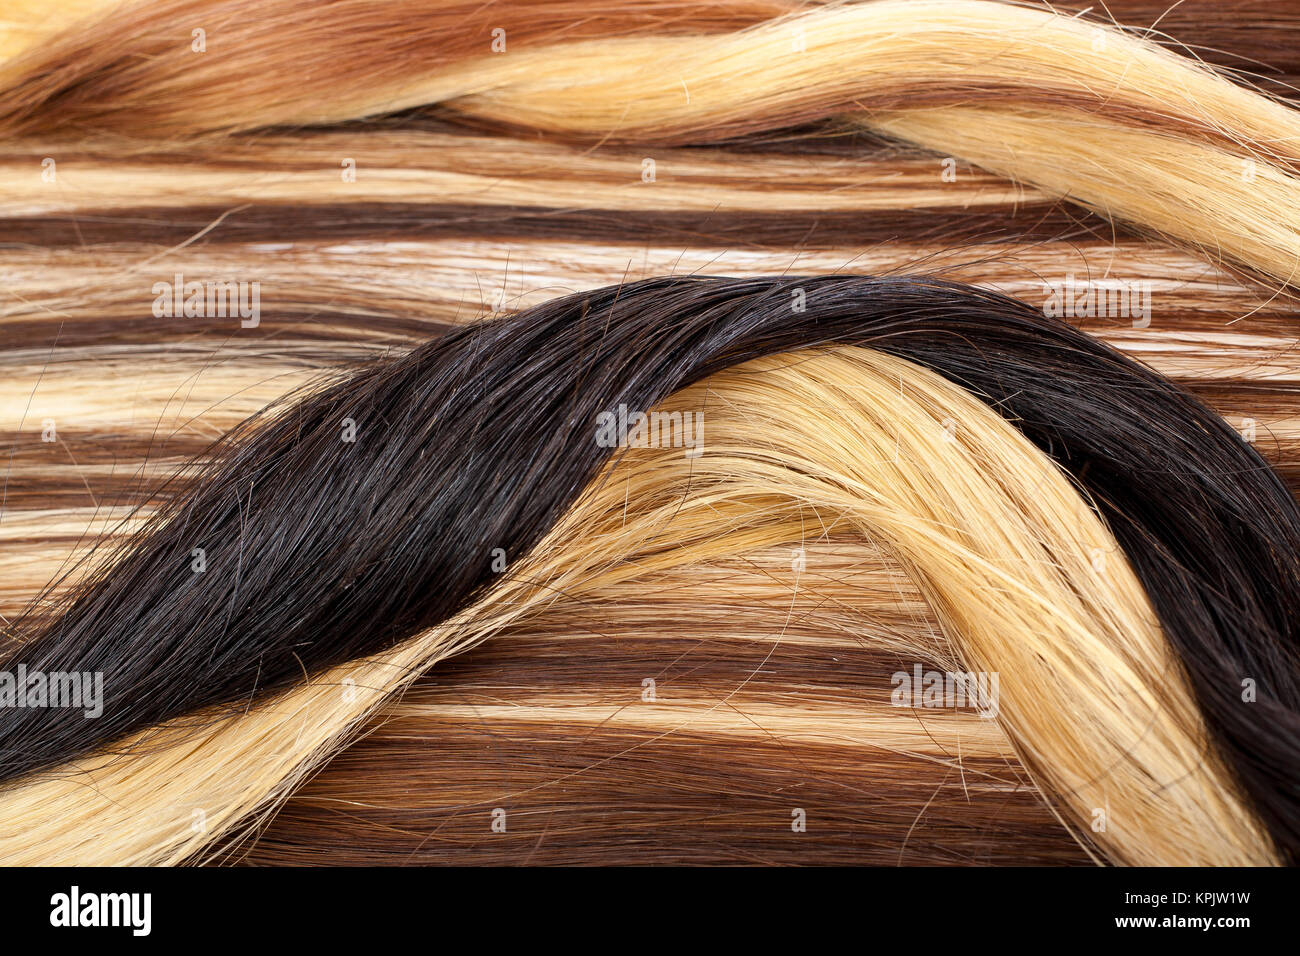 Human hair european hair weft for hair extension. Brown blonde hair texture closeup pattern. Shiny real dyed tail. Stock Photo